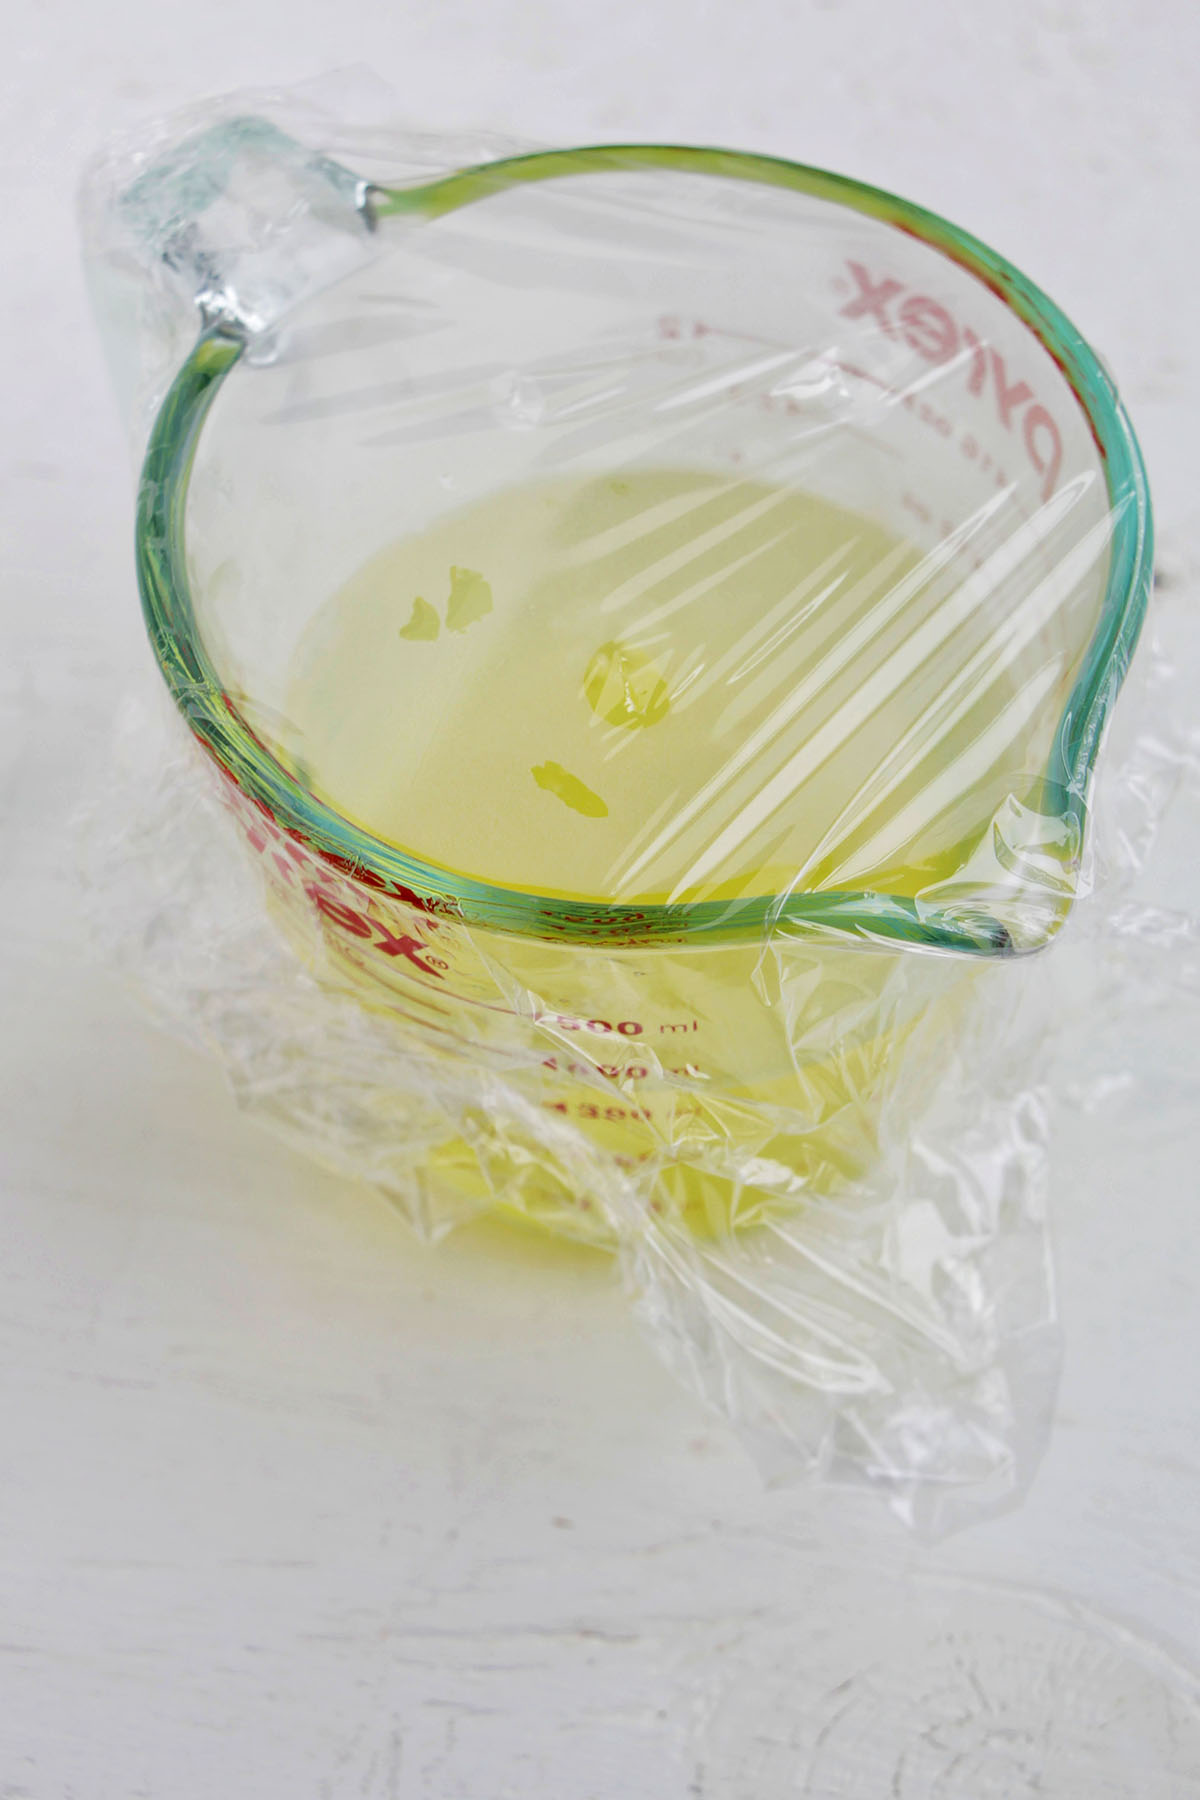 Pyrex glass measuring cup filled with egg whites and covered in plastic wrap.